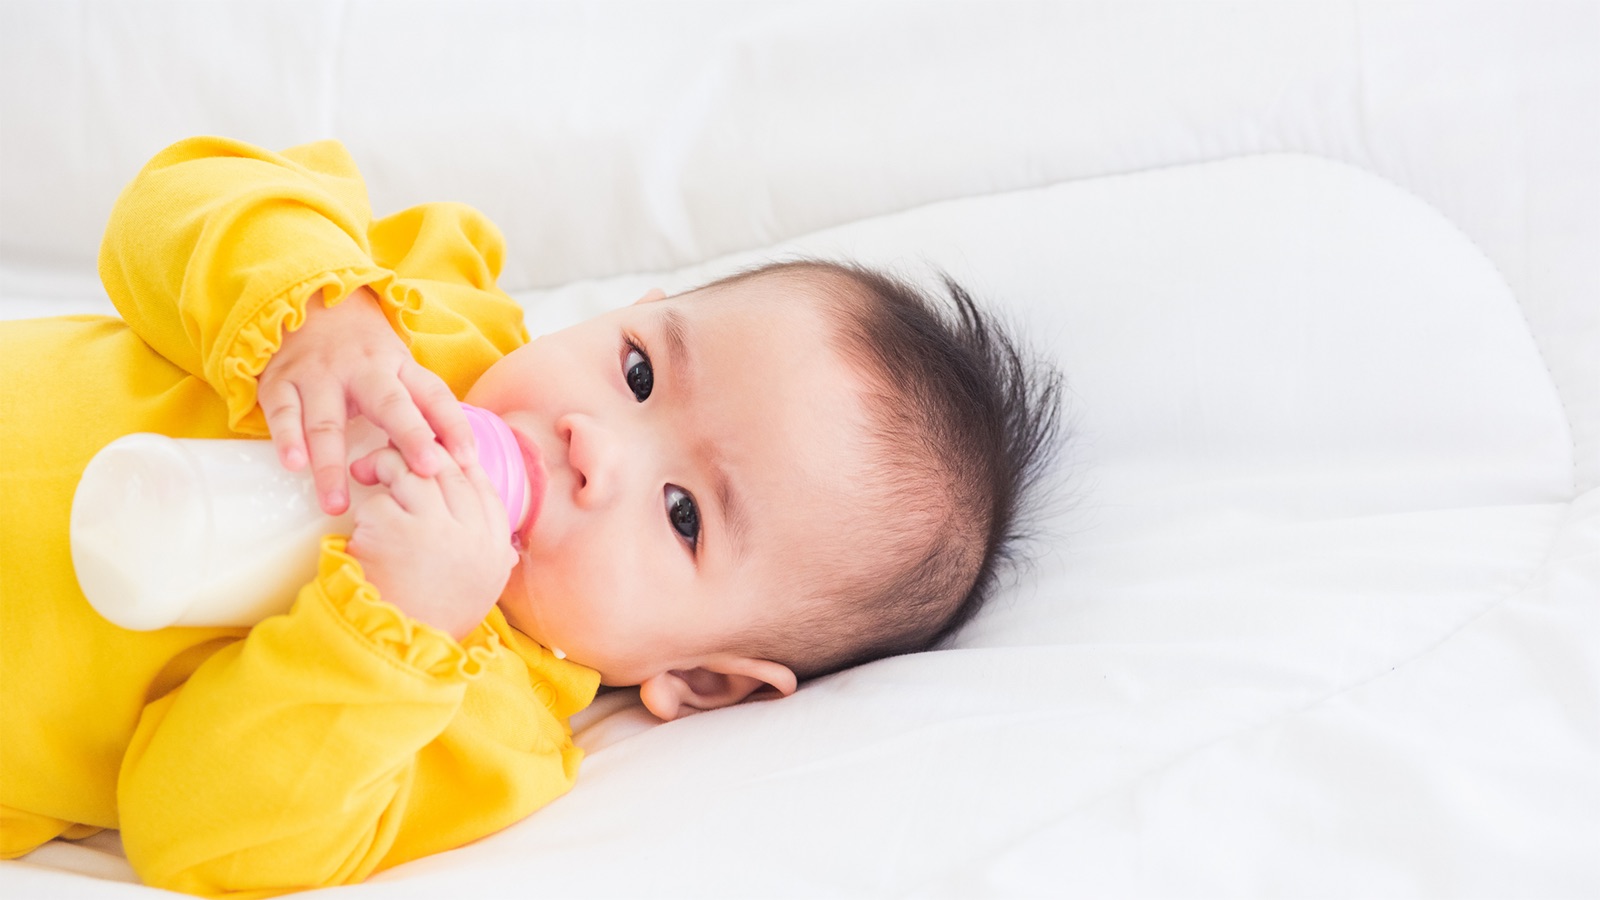 3-month old baby with bottle